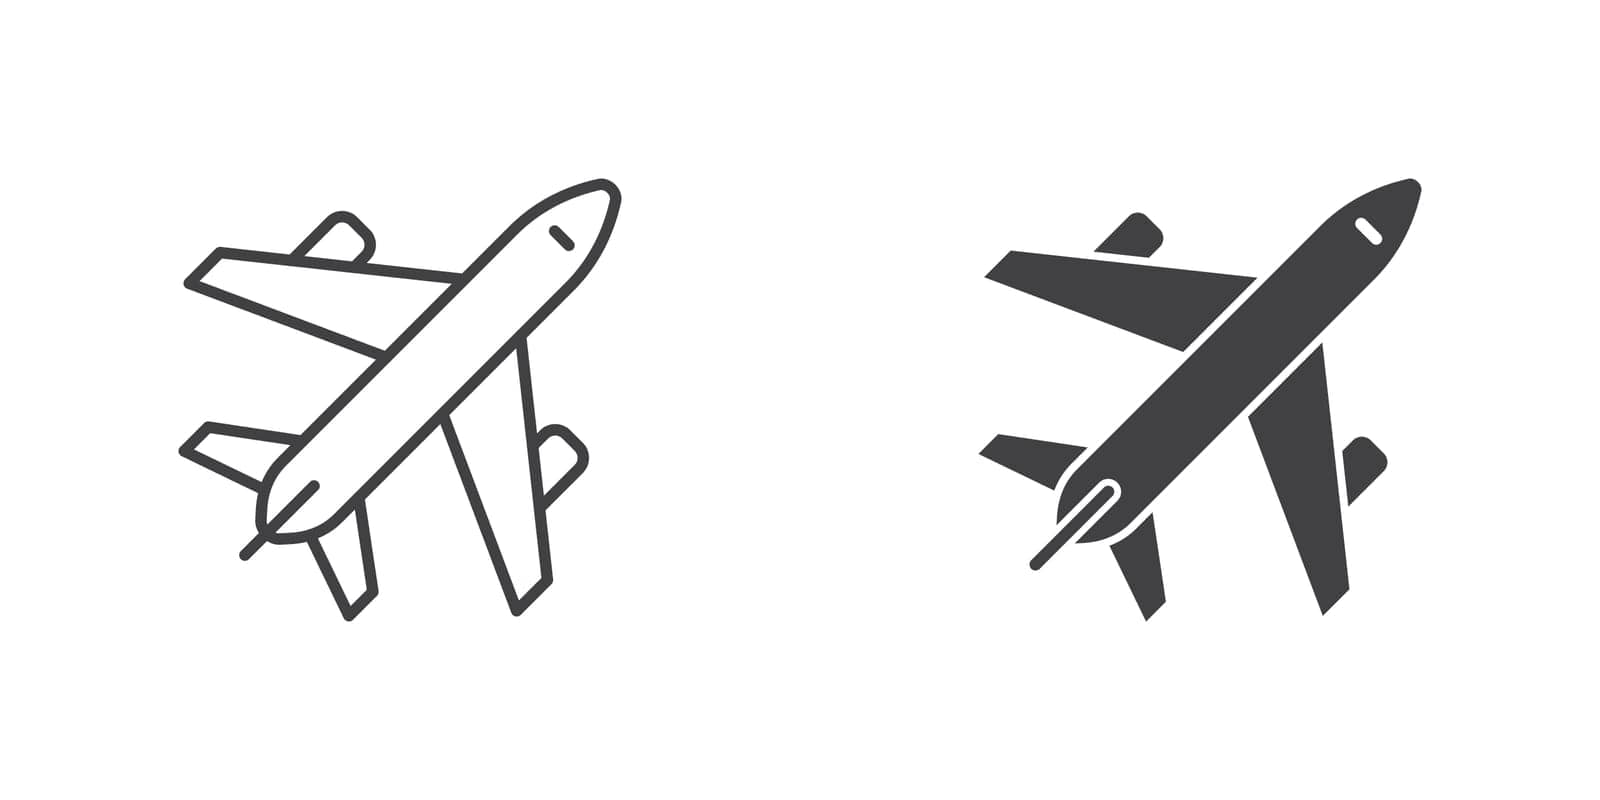 Airplane icon in flat style. Plane vector illustration on isolated background. Transport sign business concept. by LysenkoA